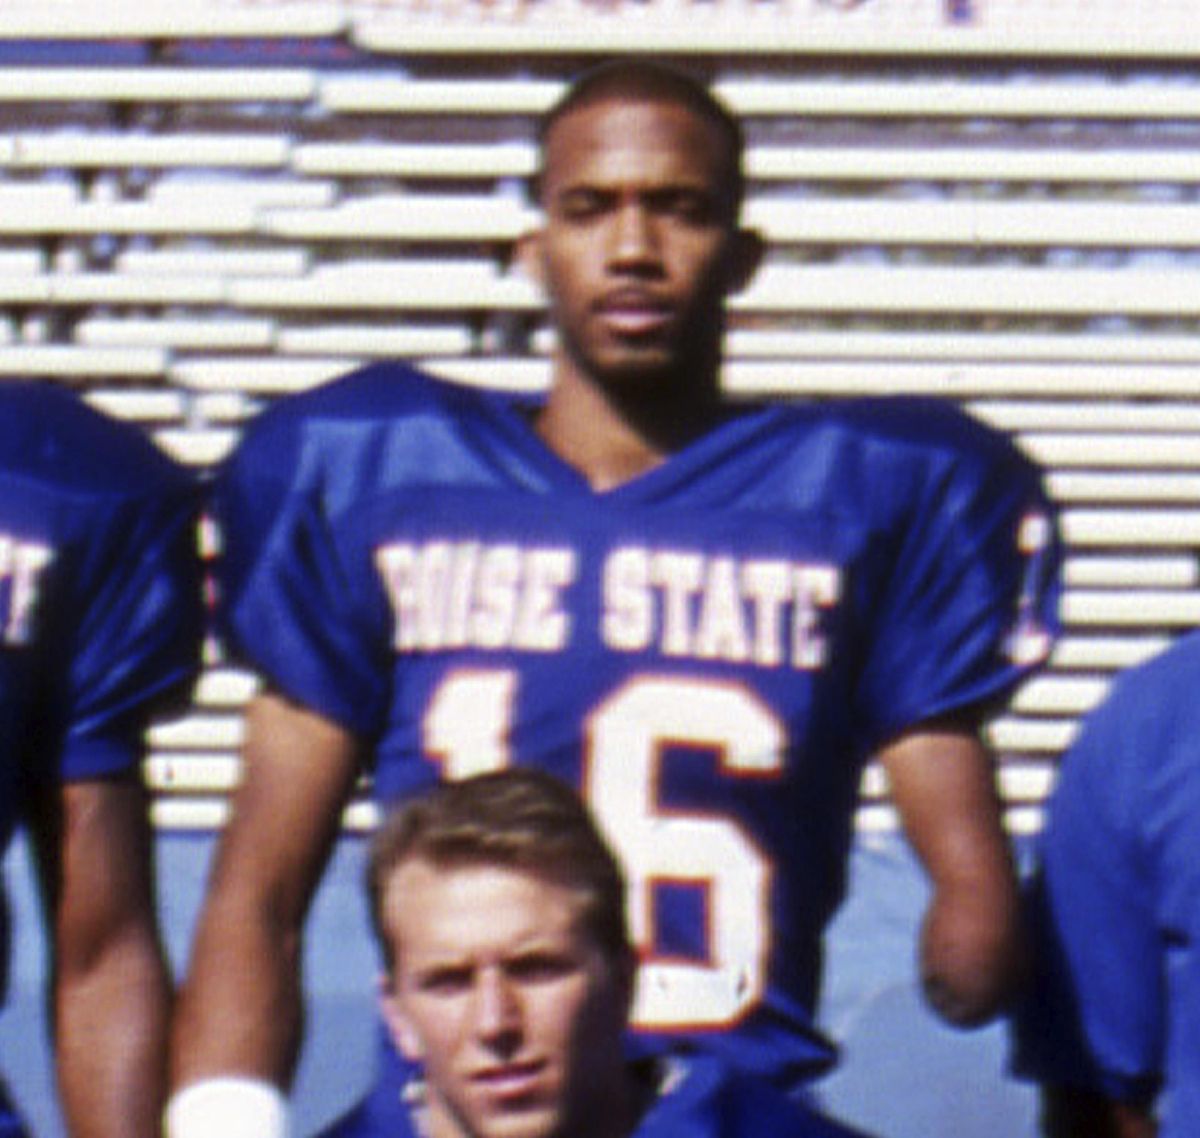 This circa 1994 photo provided by Special Collections and Archives of Boise State University shows NCAA football player DaWuan Miller. Few can understand the challenges faced by the Seattle Seahawks’ Shaquem Griffin better than Miller, who played football for BSU in the 1990s. (Special Collections and Archives / Boise State University)